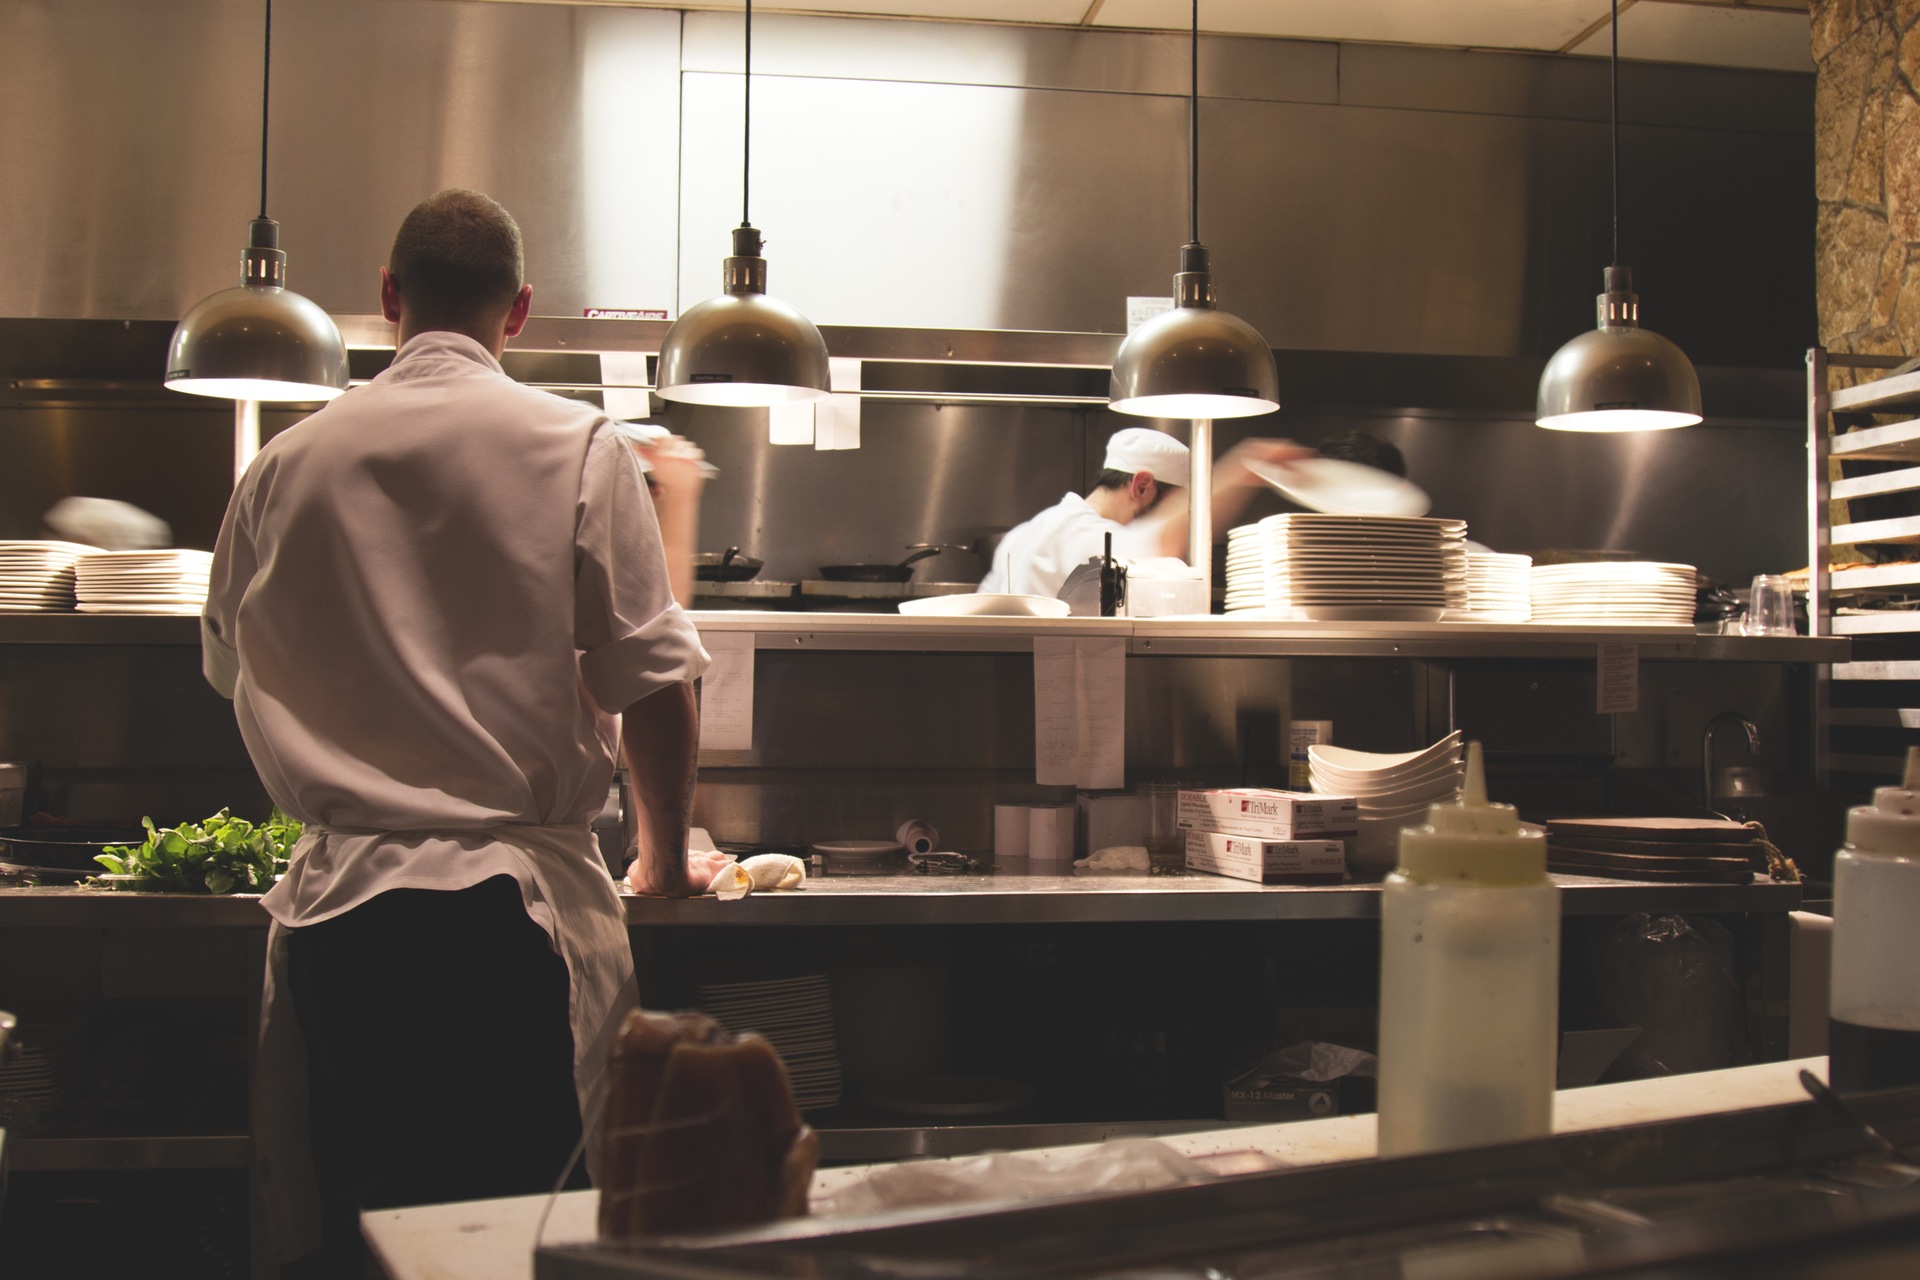 Chefs And Cooks Working In Kitchen Area Of Restaurant